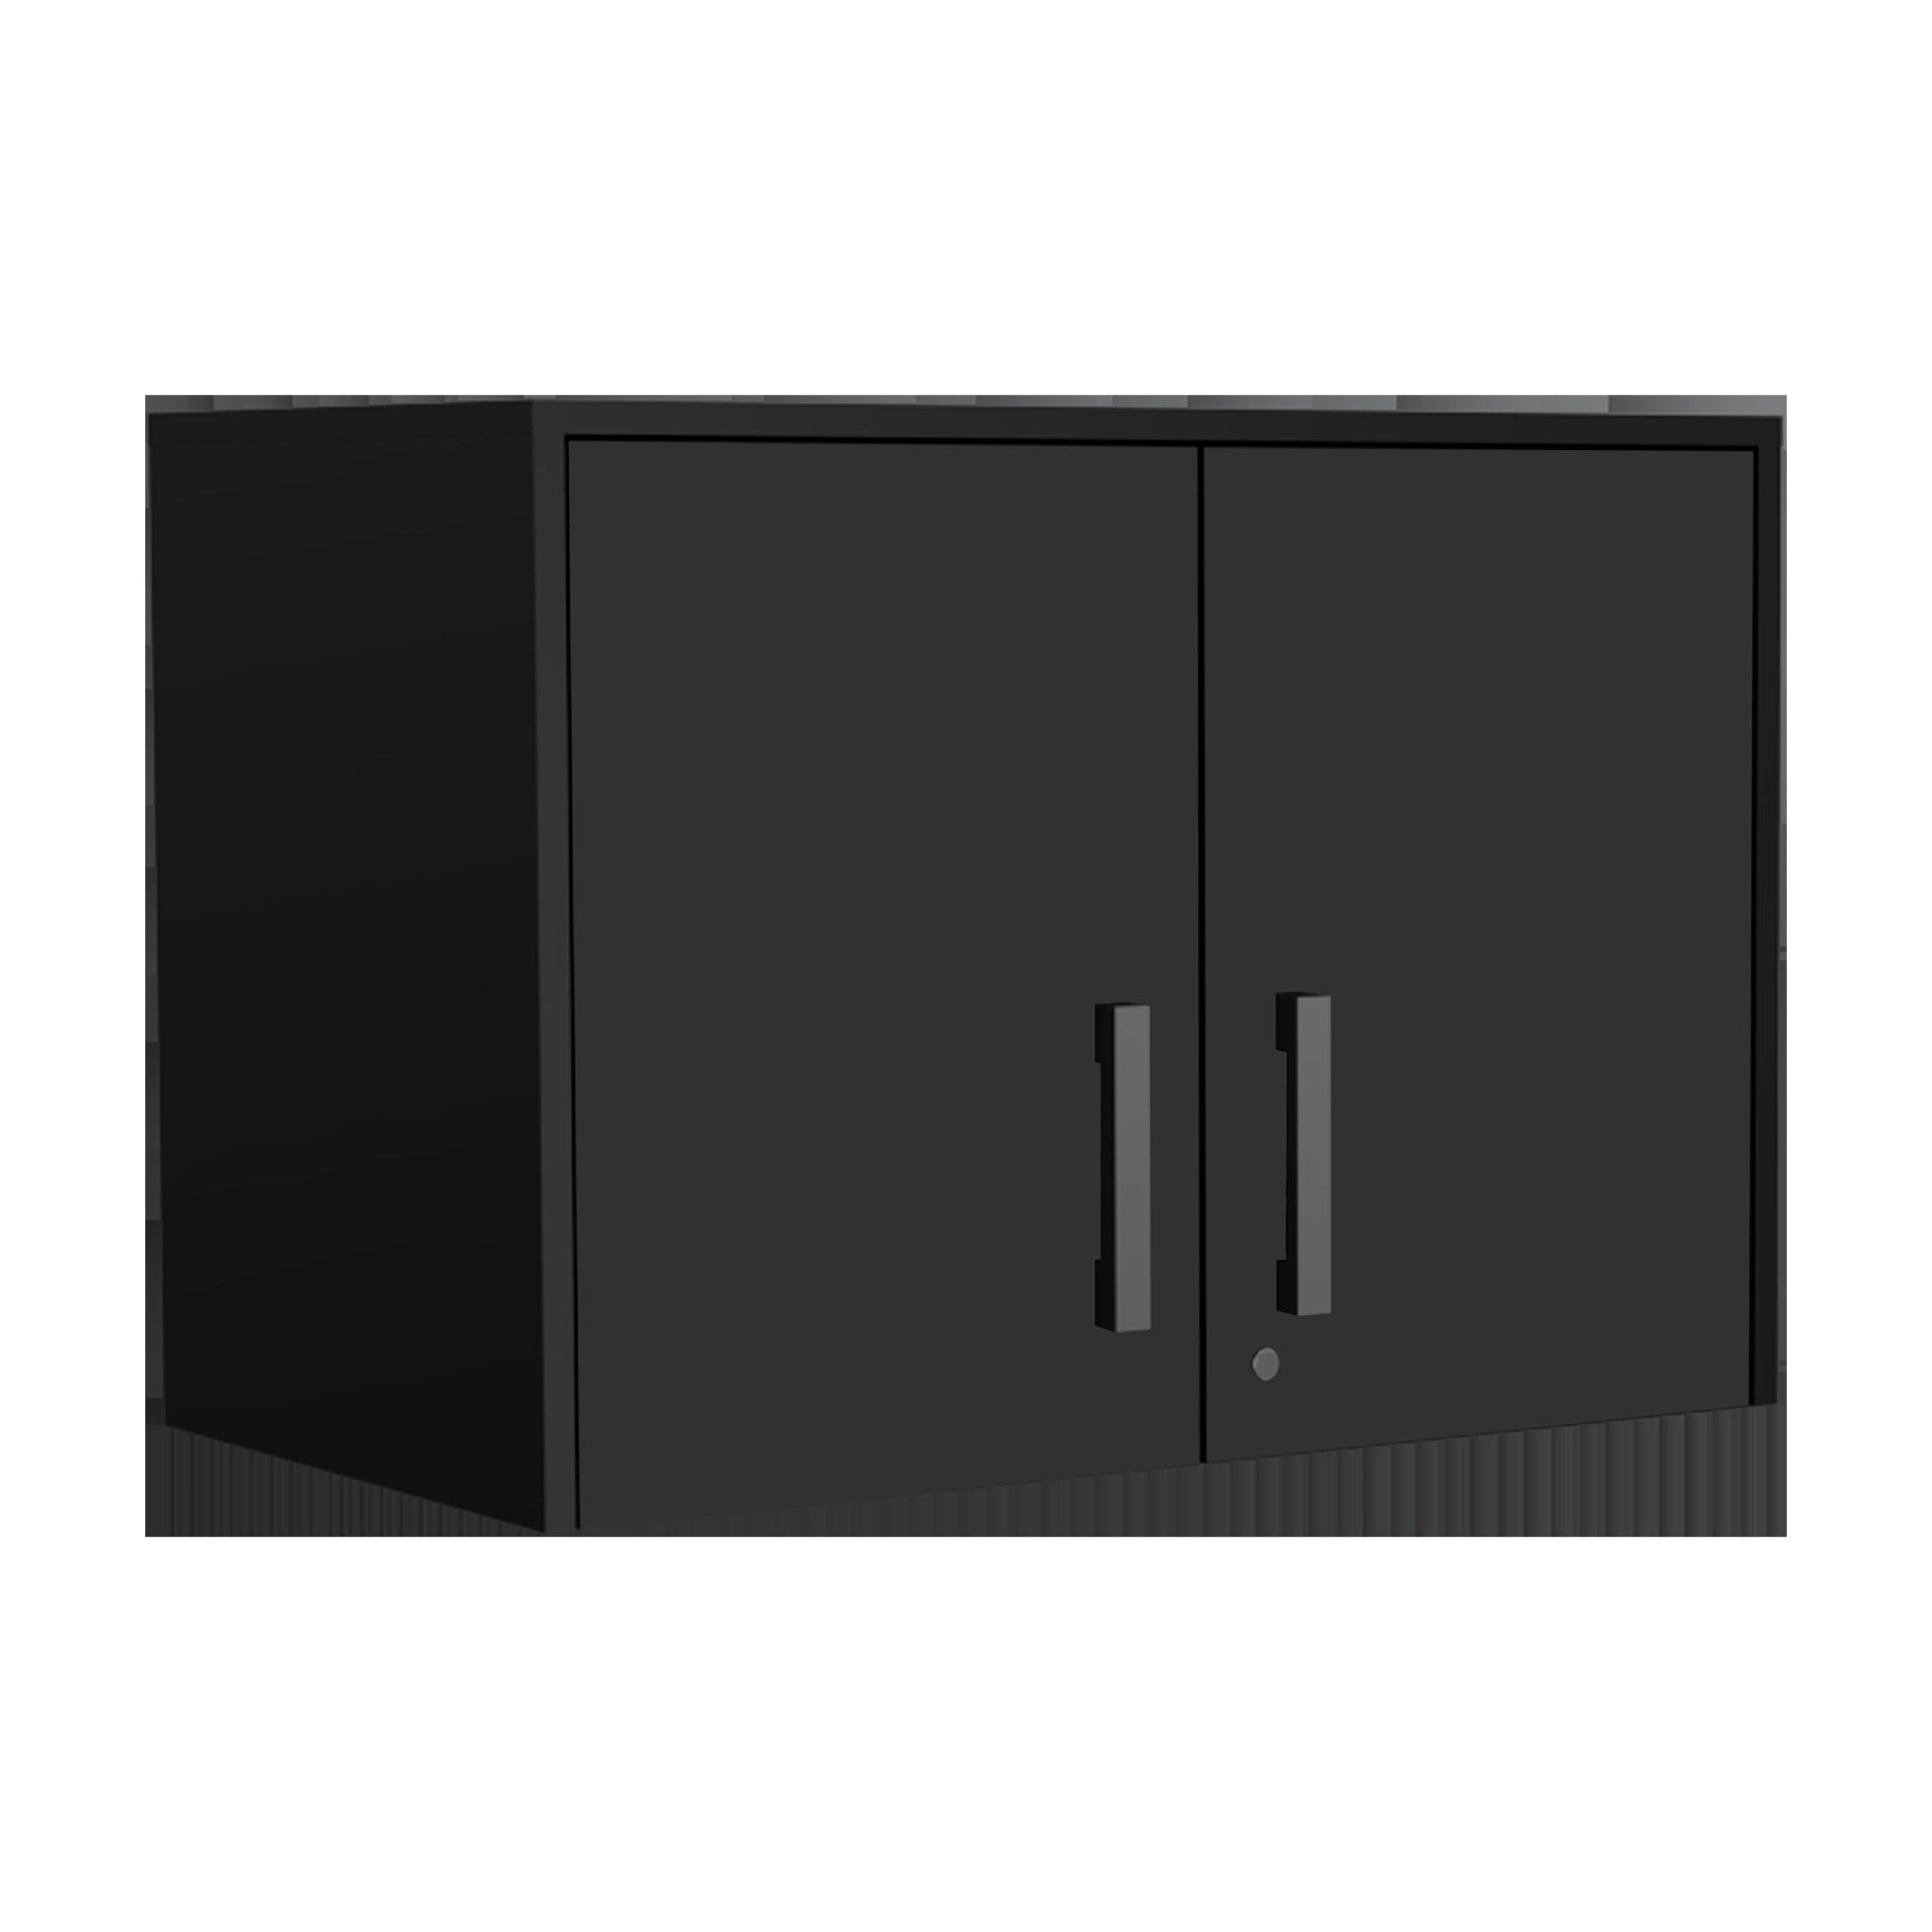 28" Black Wall mounted Accent Cabinet With Four Shelves